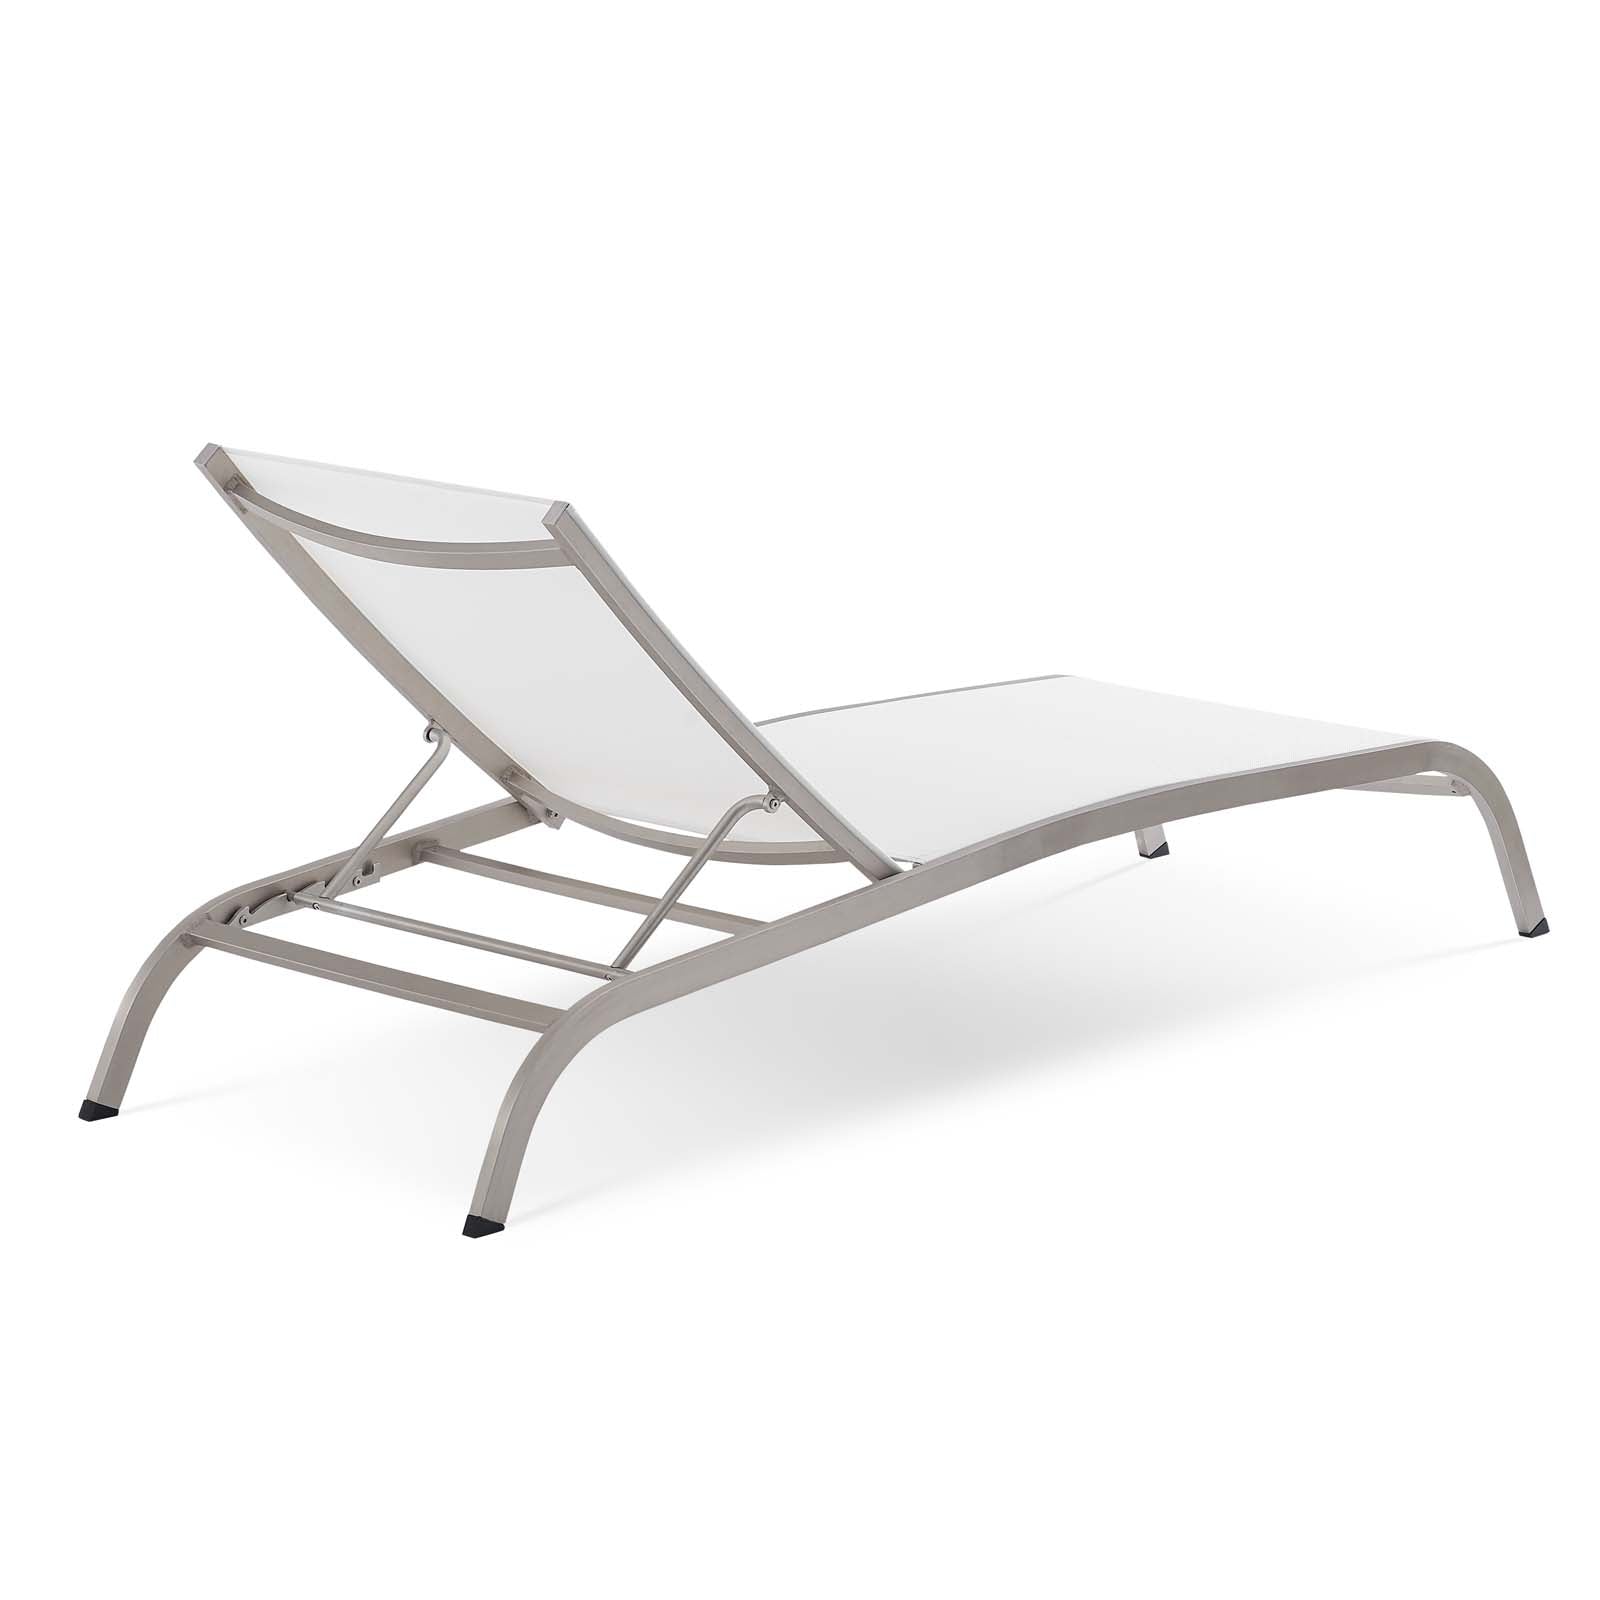 Modway Outdoor Loungers - Savannah Outdoor Patio Mesh Chaise Lounge Set of 2 White